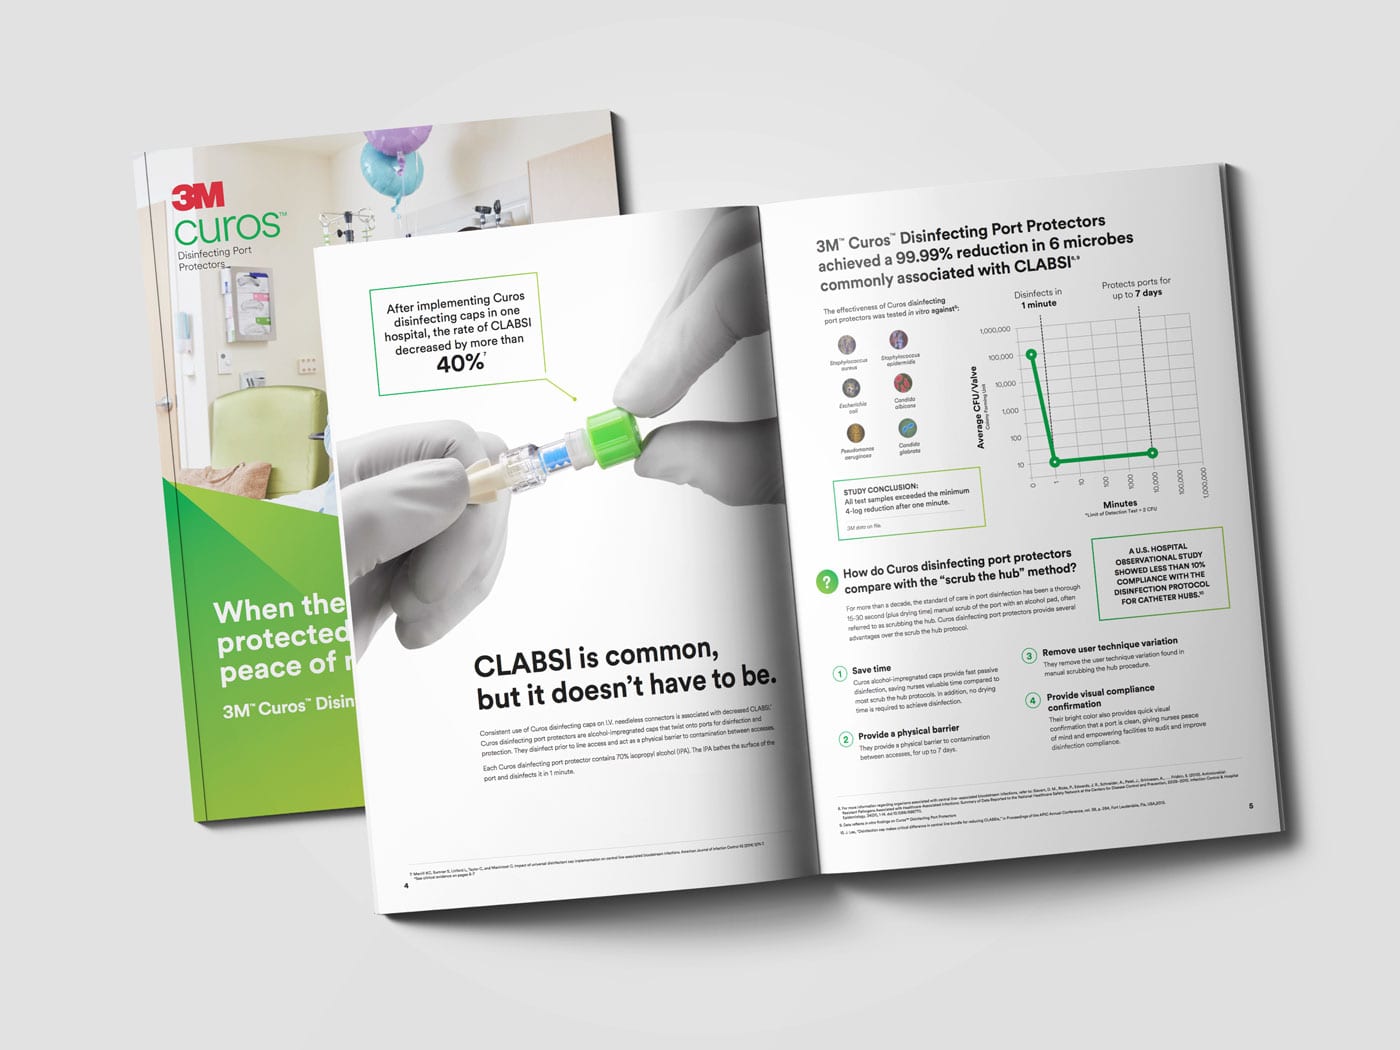 3M Curos product family brochure